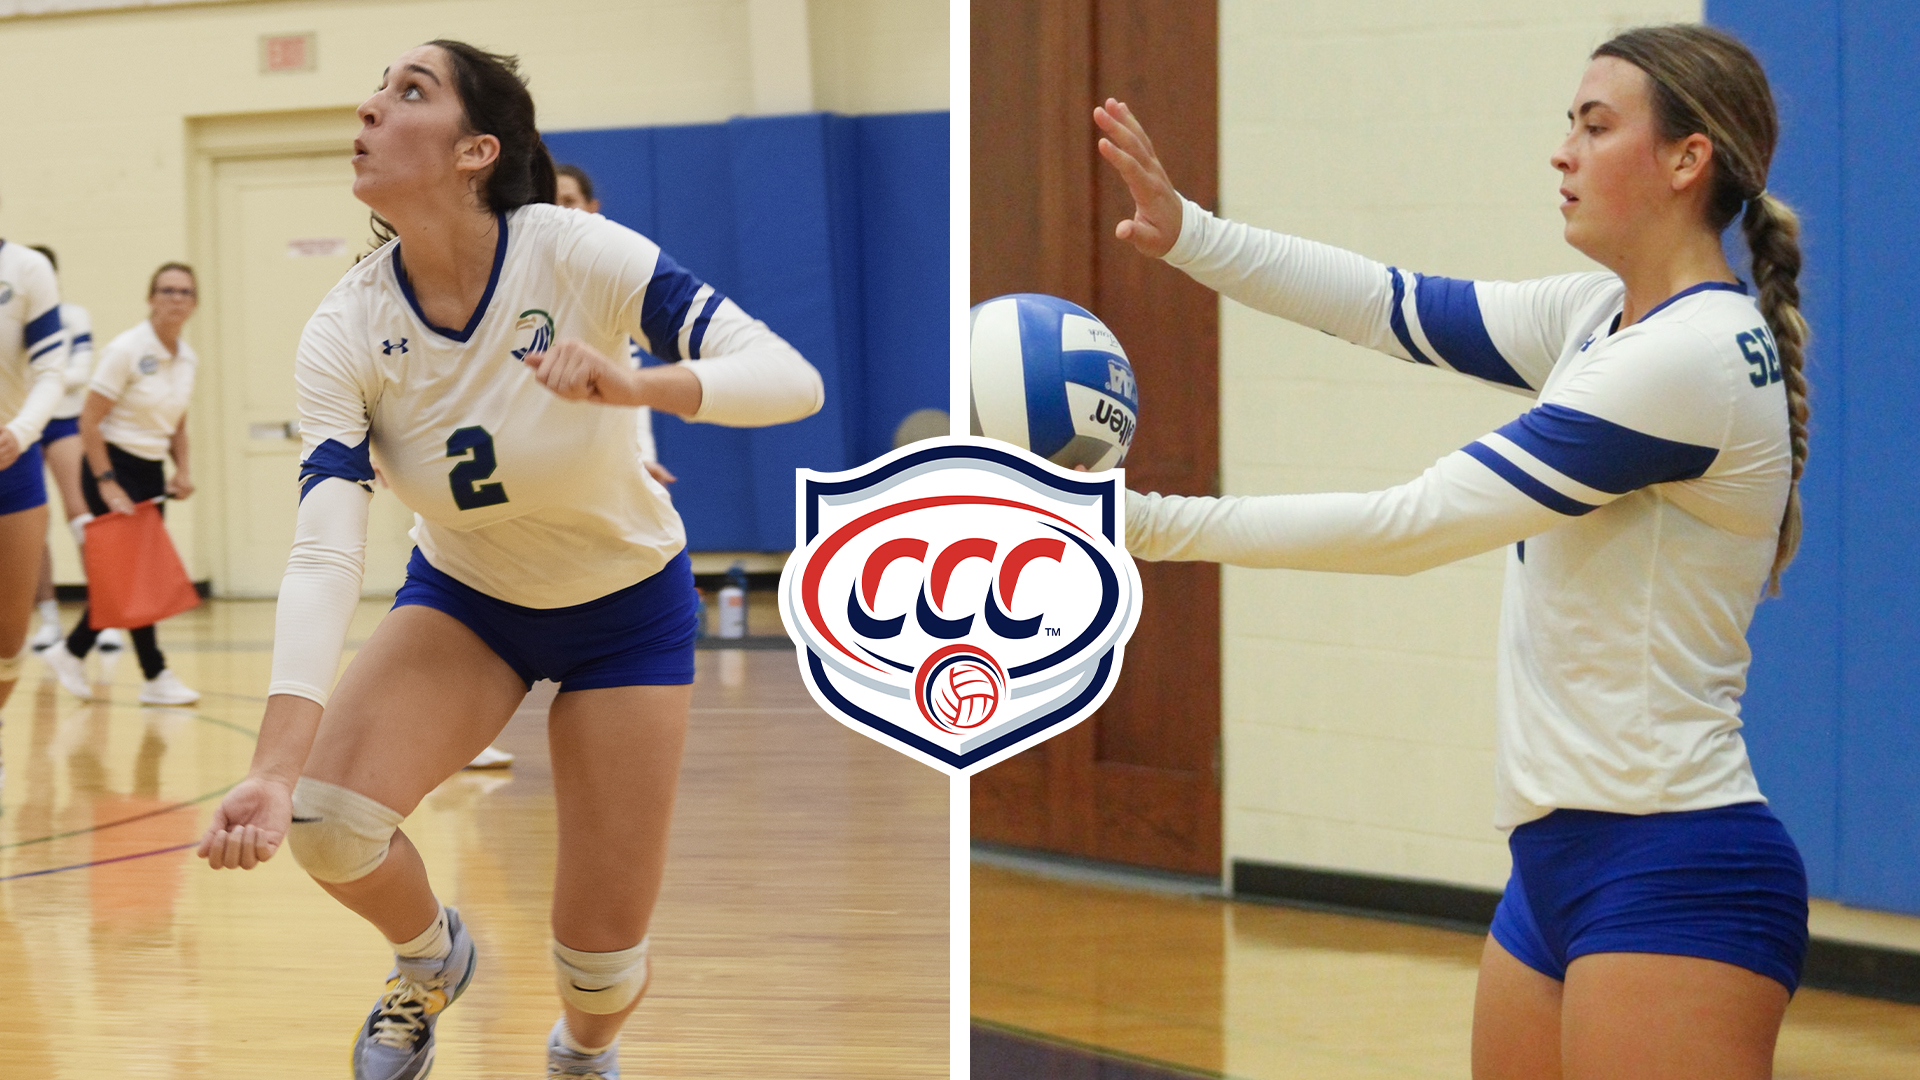 Siena DeCicco (l) and Brighton Solheim (r) both made All-CCC for women's volleyball.